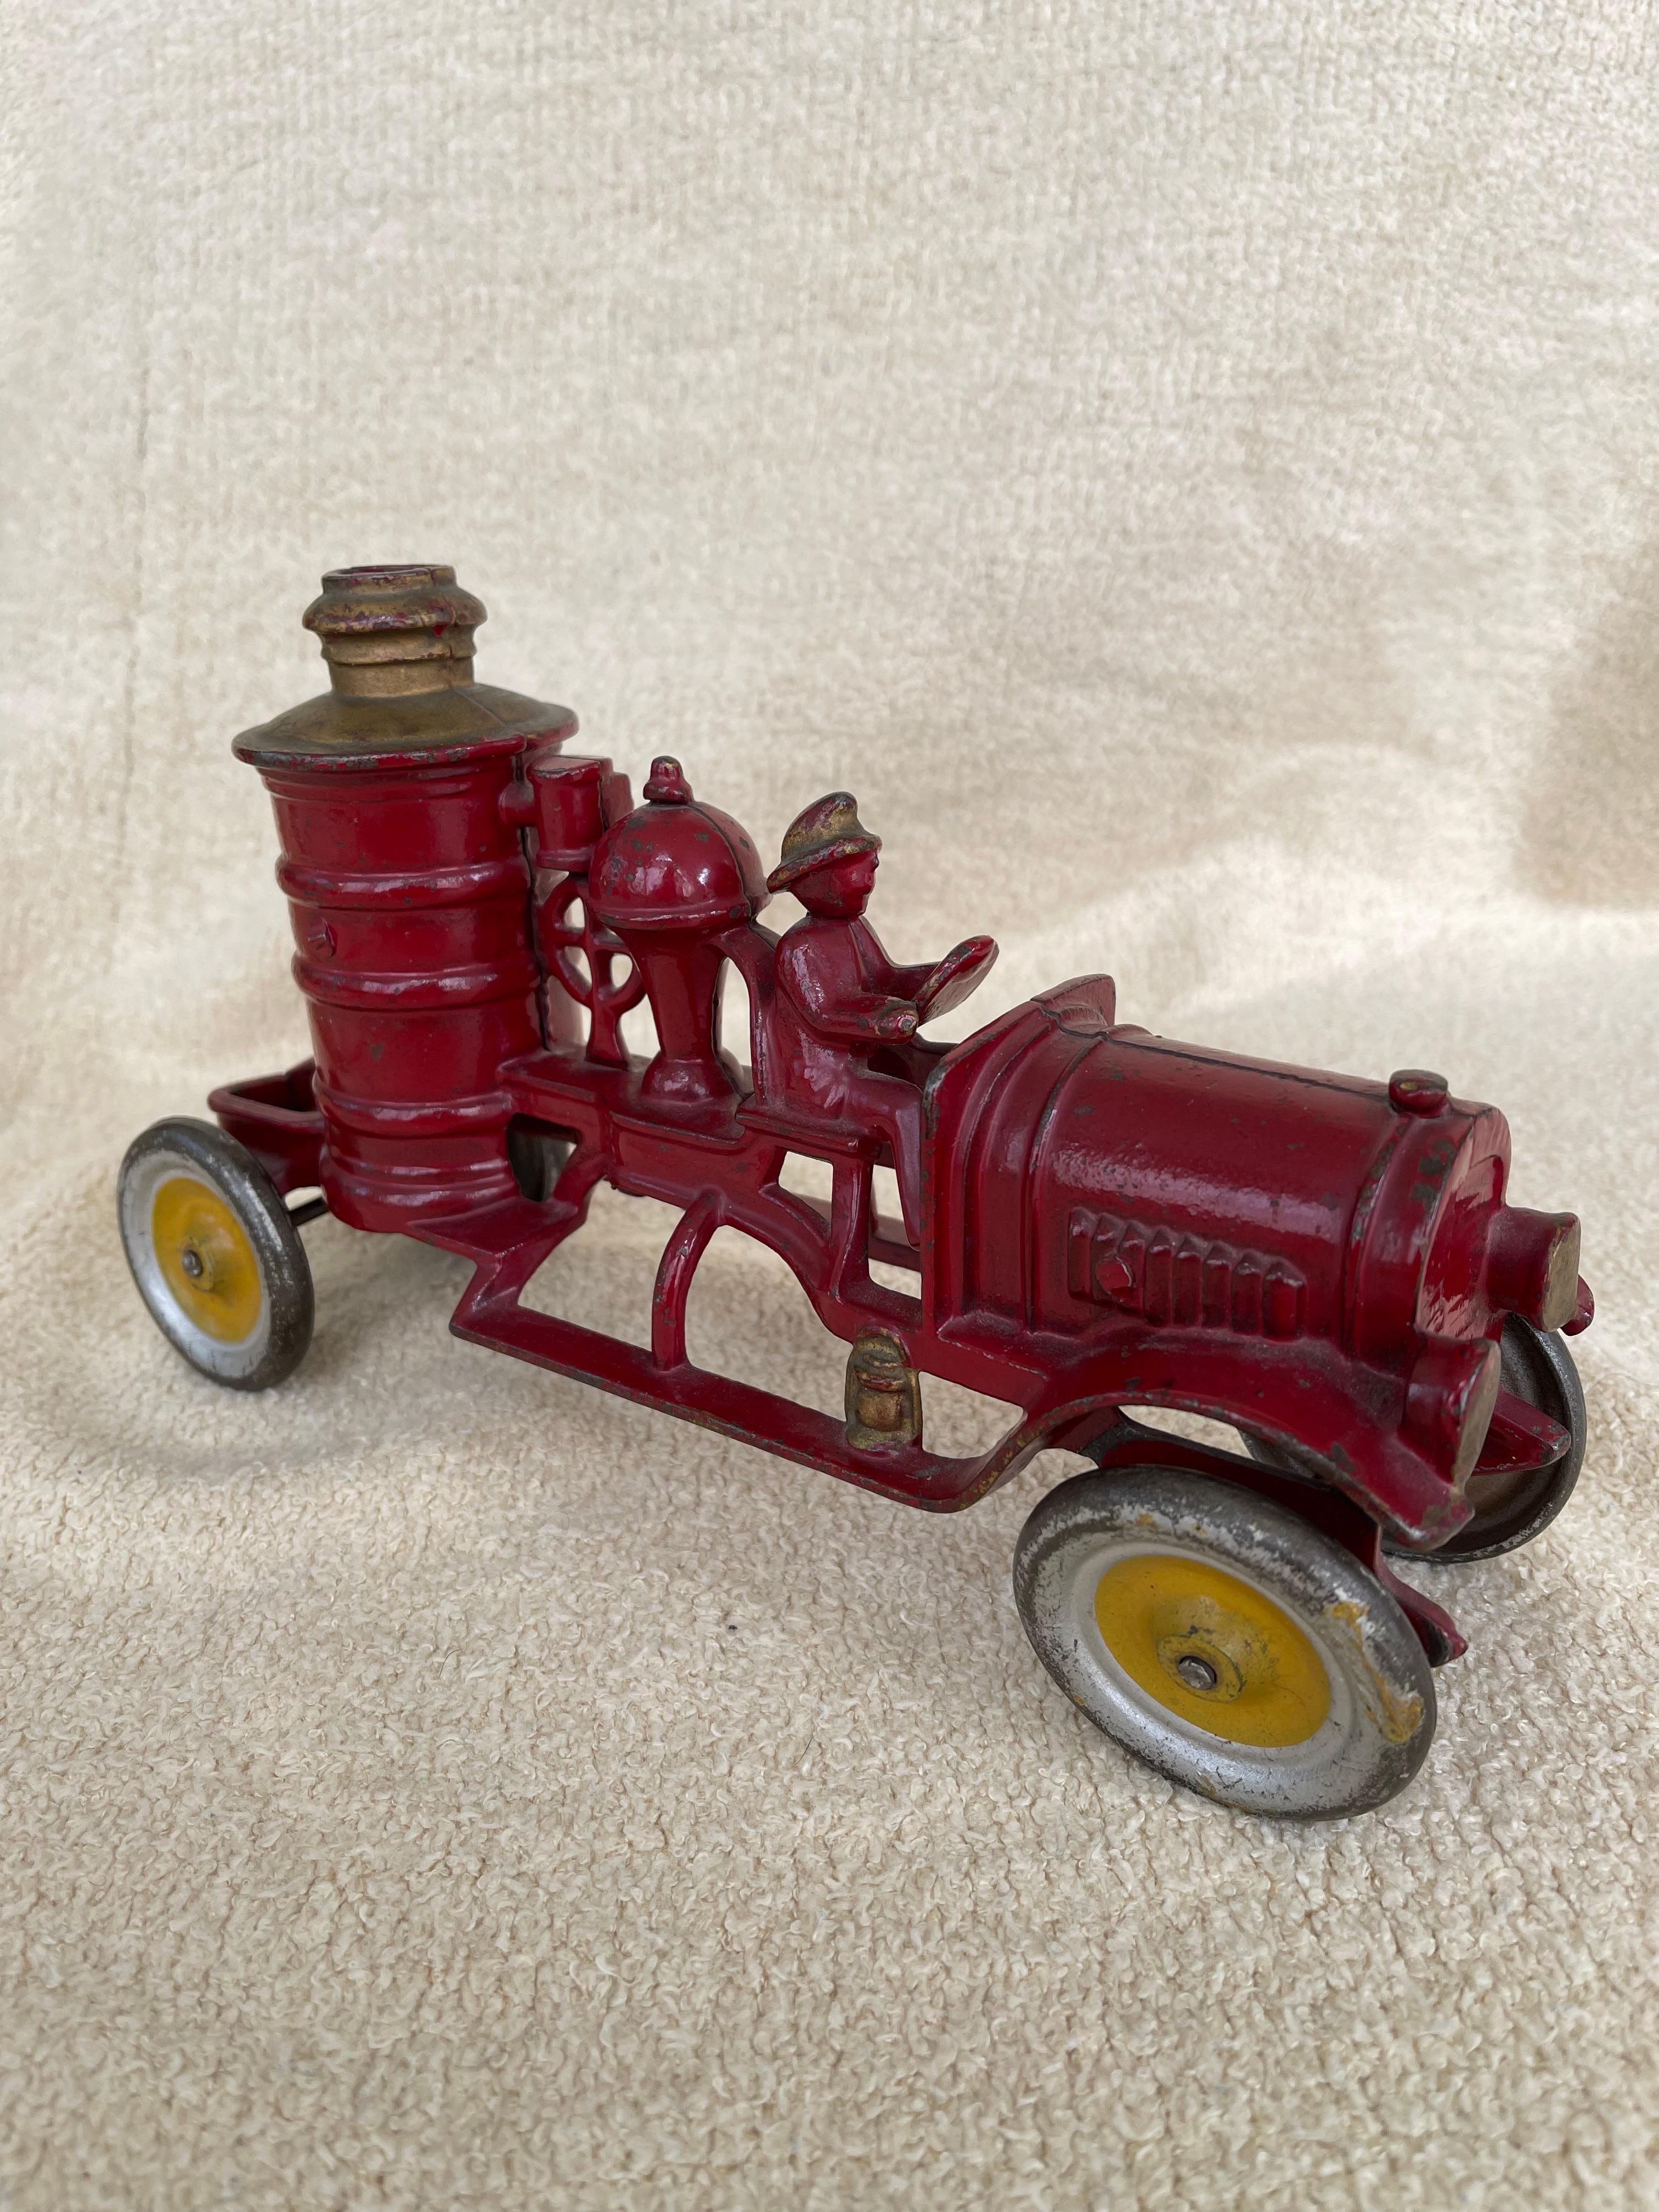  This rather large fire truck was done at the height of the production of cast iron toys, 1920's. Having iron wheels as opposed to rubber, which does often melt, and rich original bright red paint. As anyone will tell you when collecting American